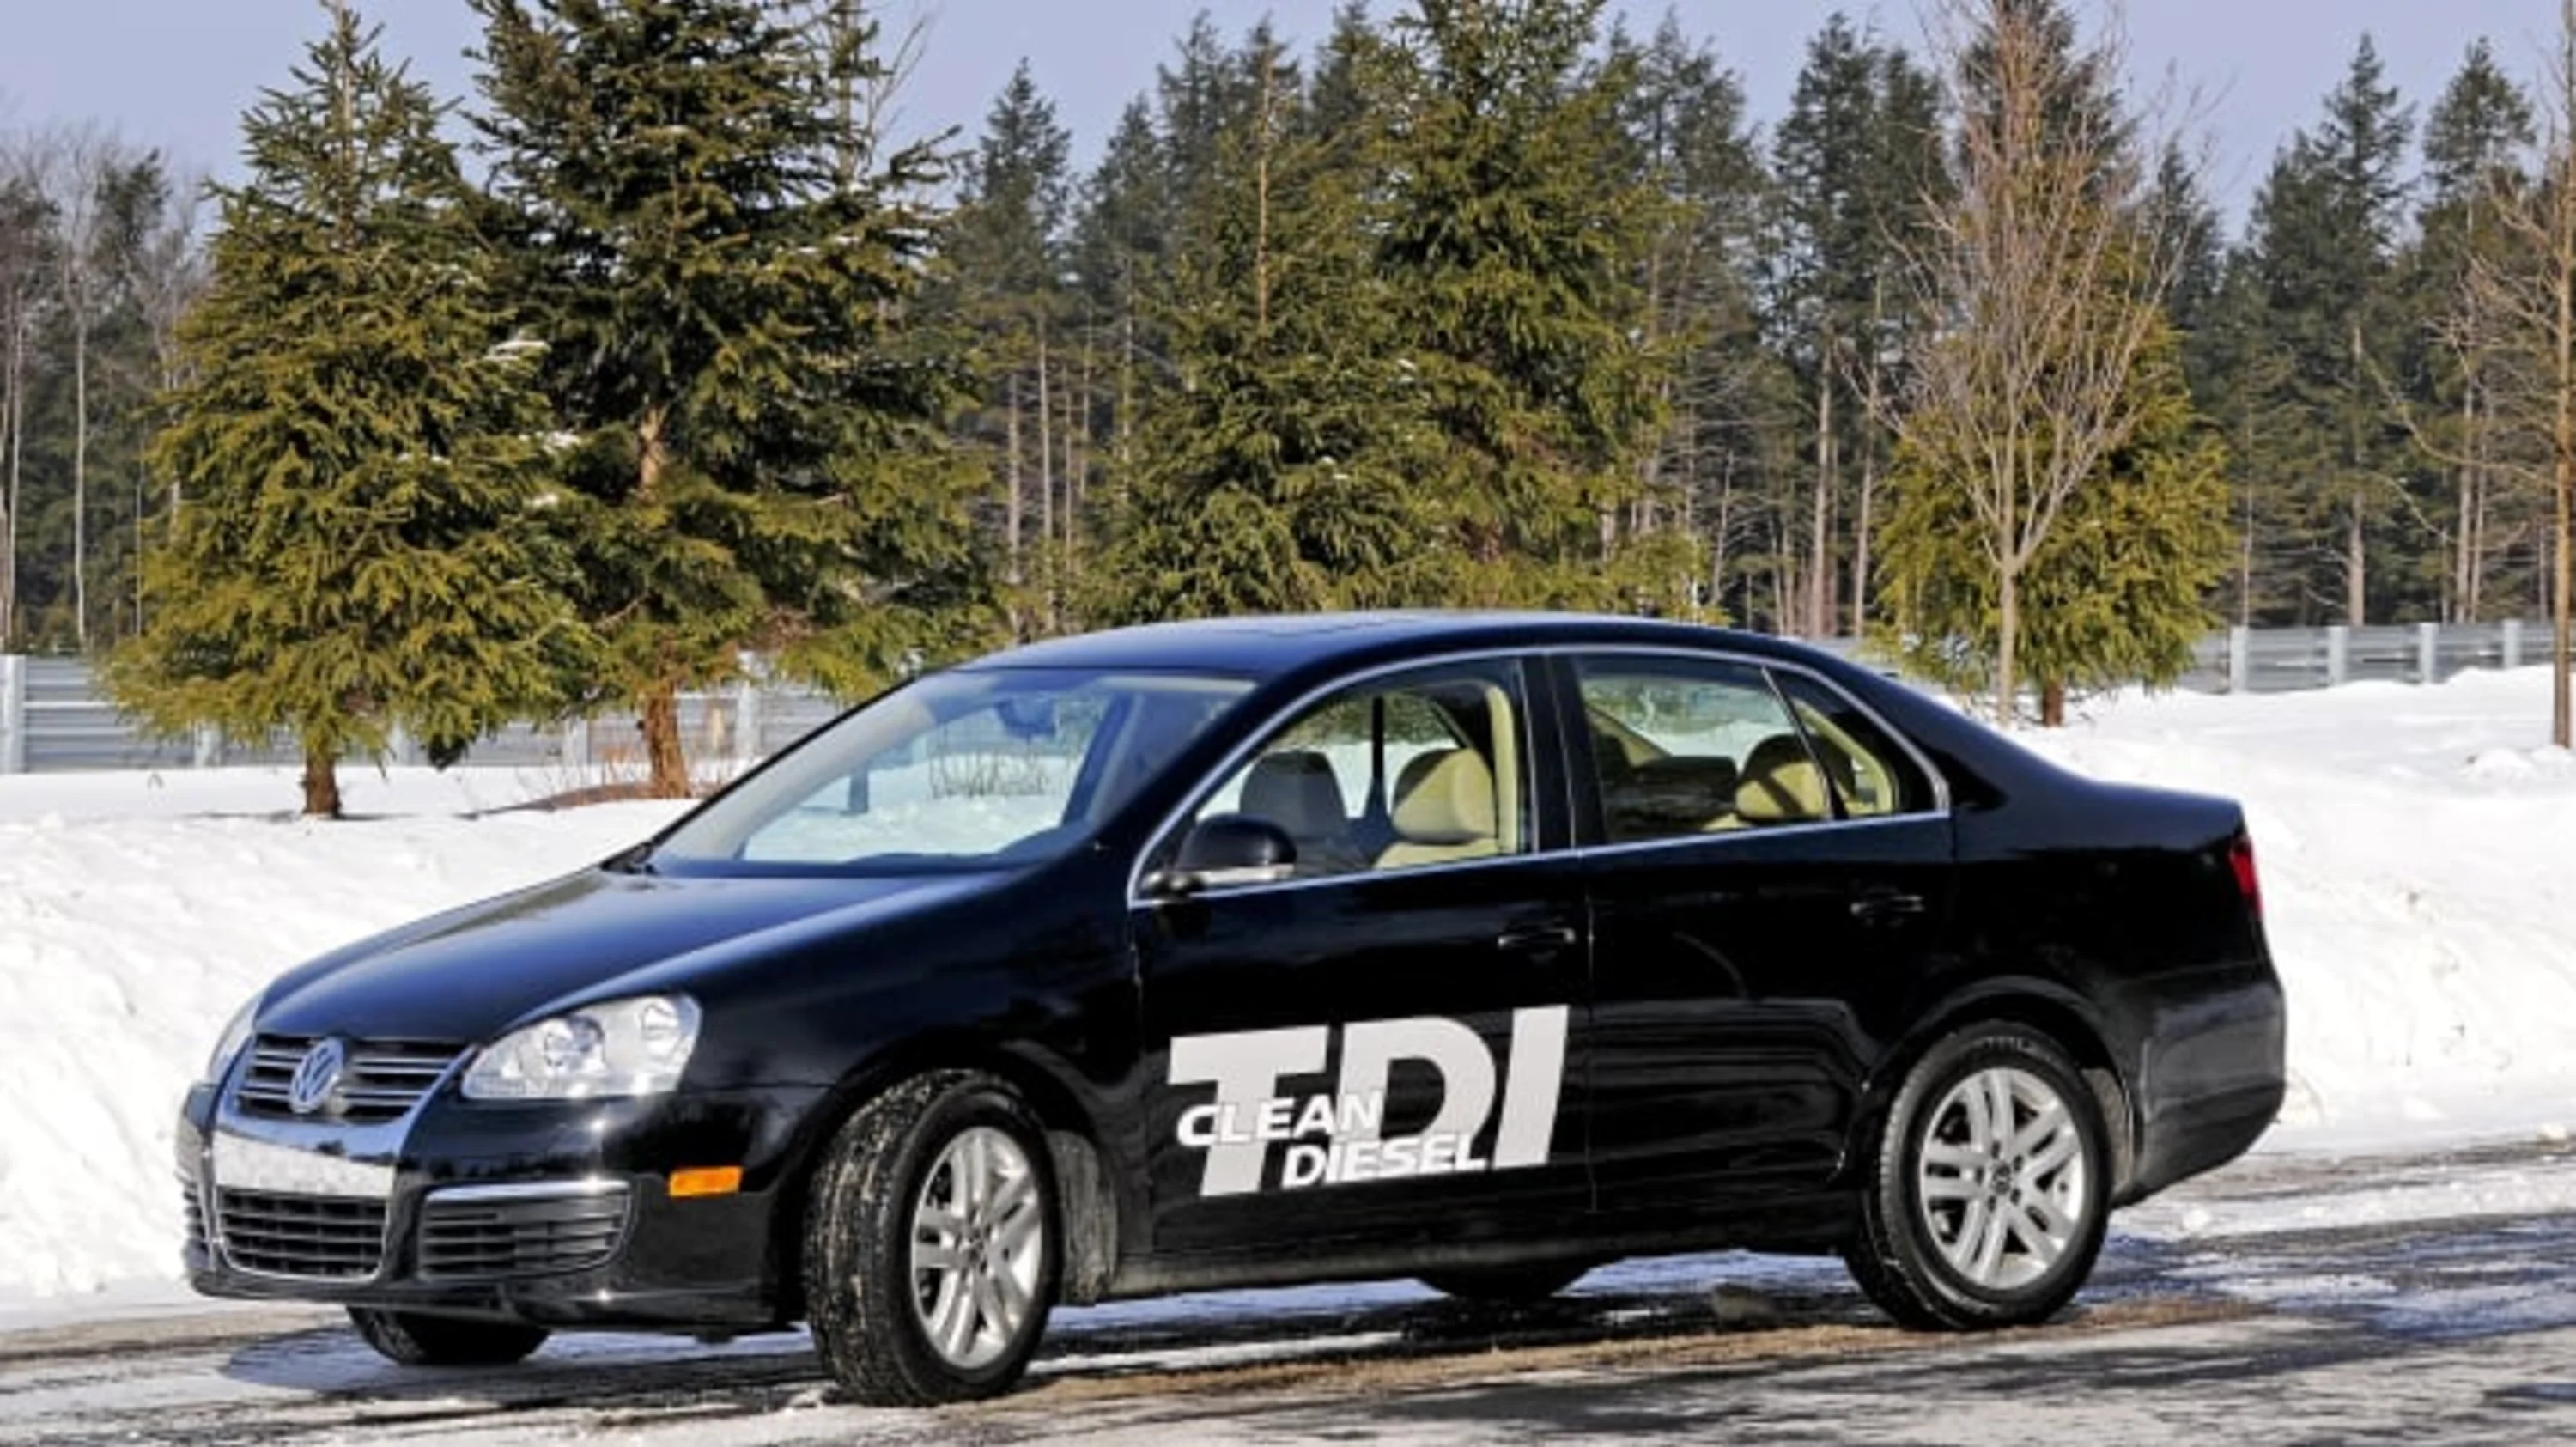 The Volkswagen Jetta TDI sits on a snowy road in Monticello,